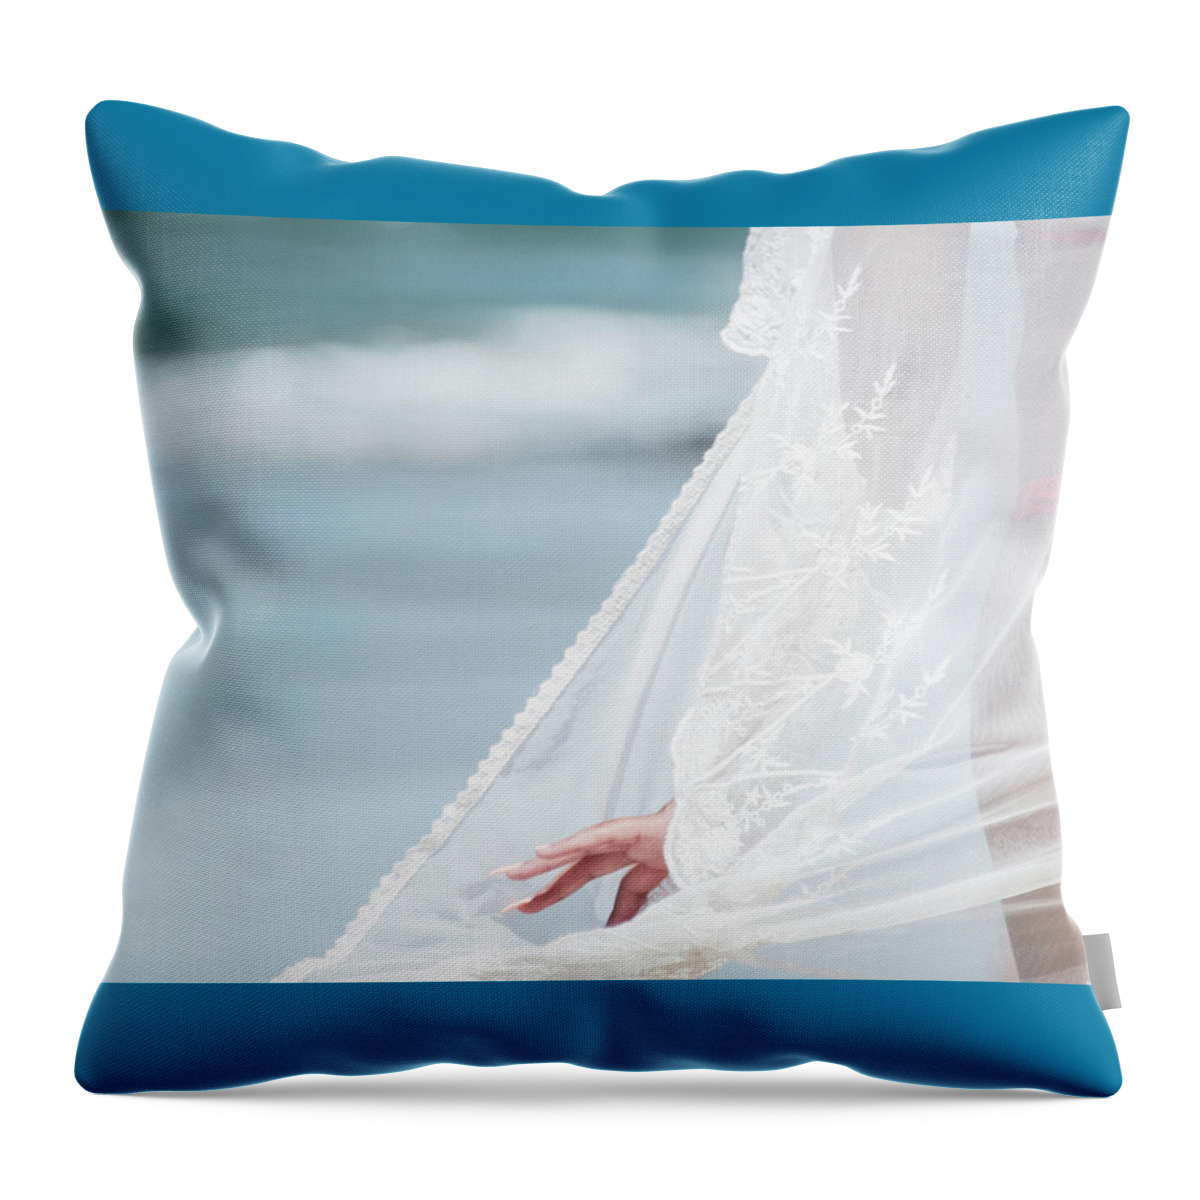 Seaside Throw Pillow featuring the photograph Grace by Pamela Steege